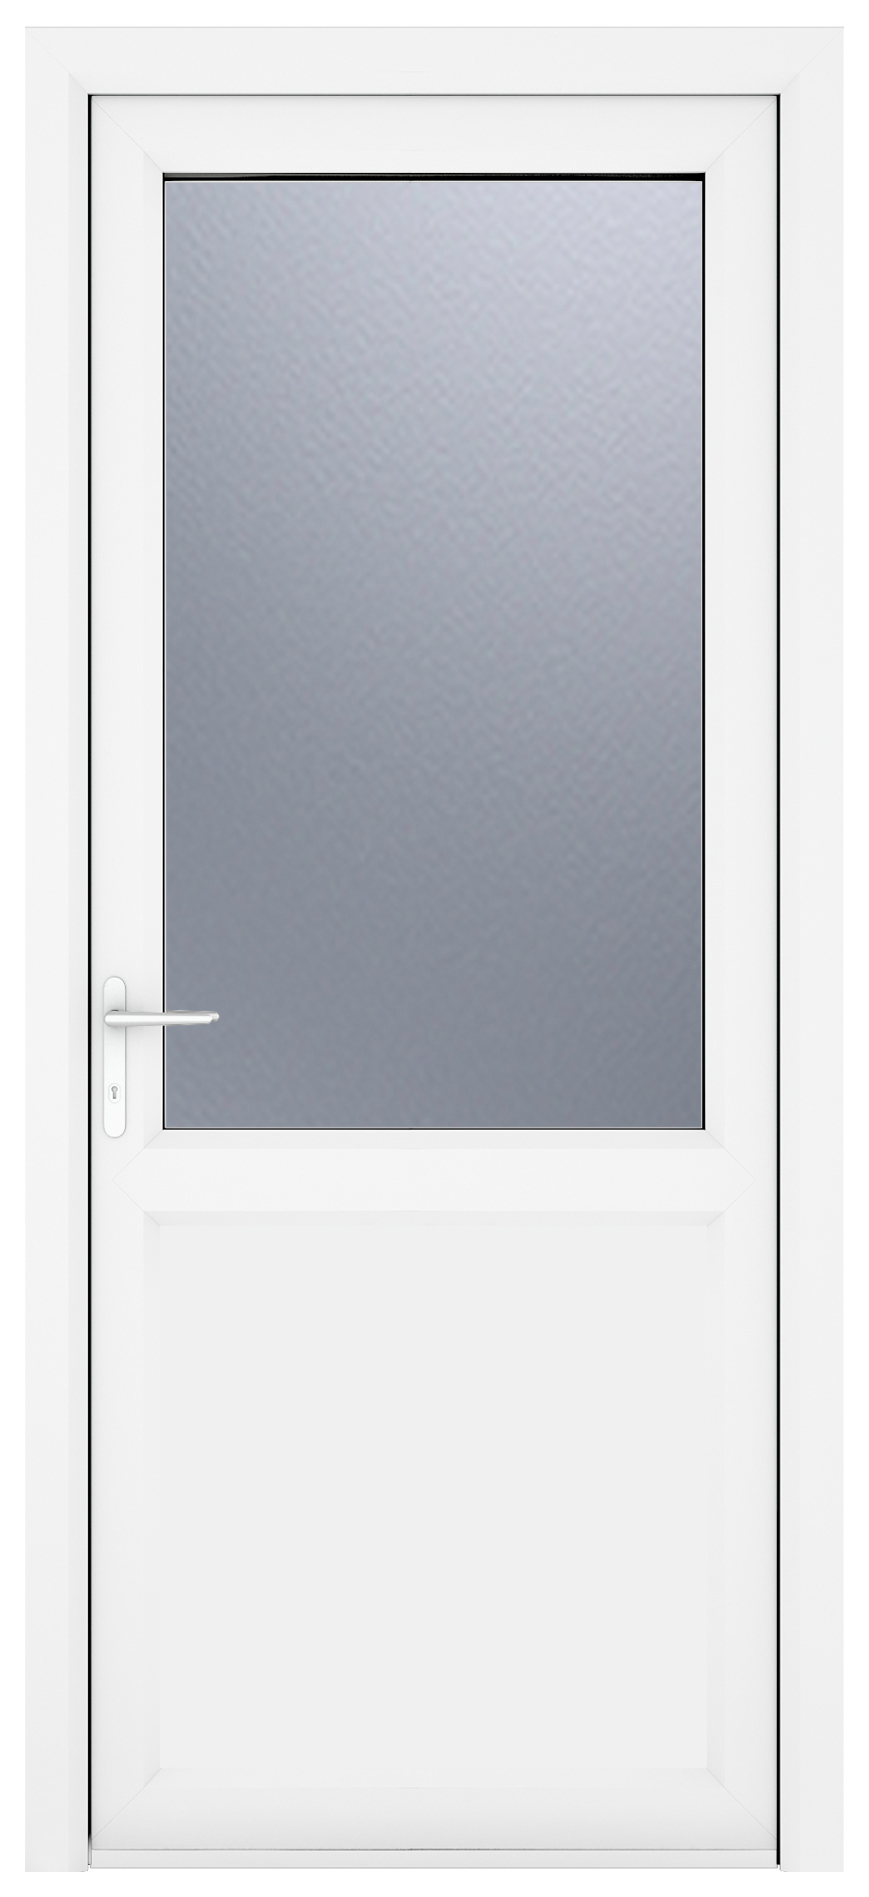 Crystal uPVC White Right Hand Inwards Obscure Double Glazed Half Glass Half Panel Single Door - 2090mm